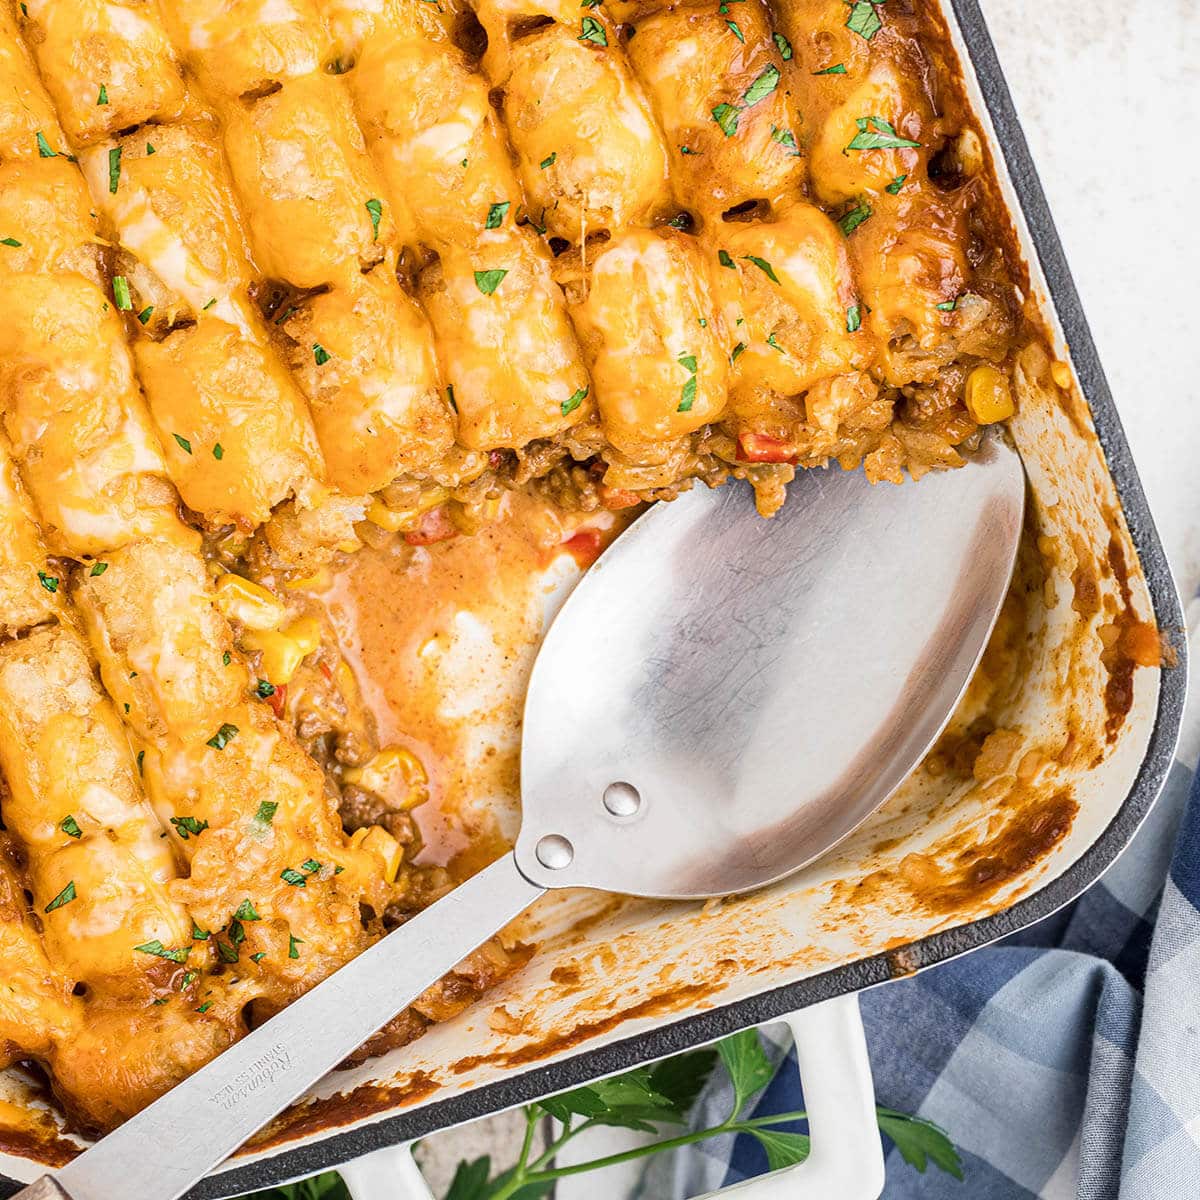 Cheesy Mexican Tater Tot Casserole in dish with spoon.